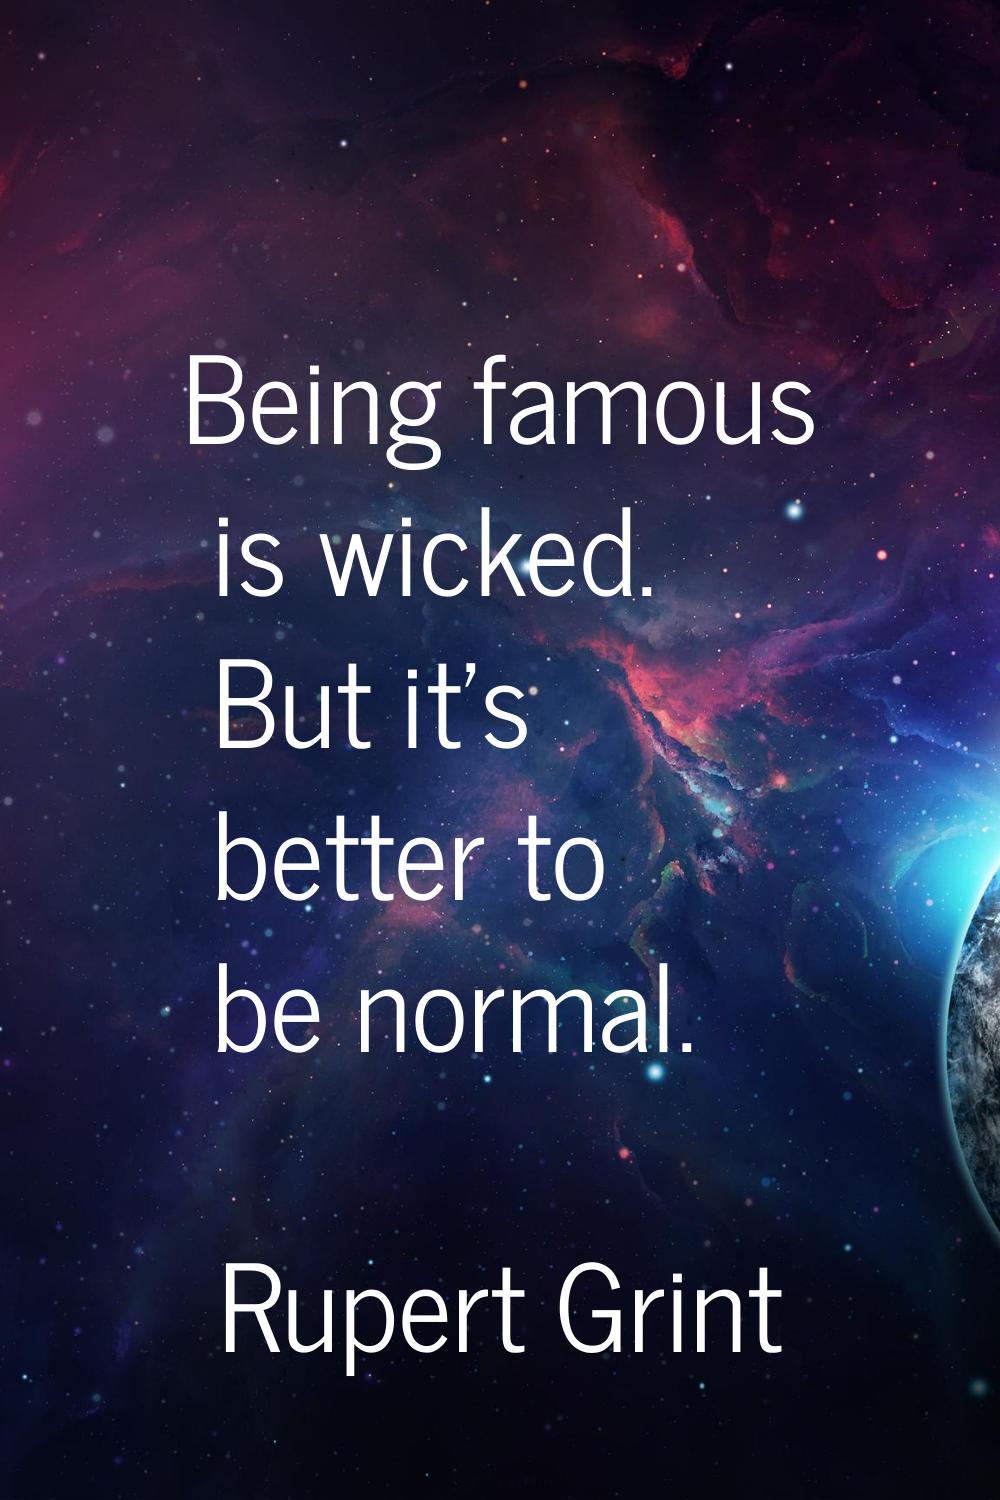 Being famous is wicked. But it's better to be normal.